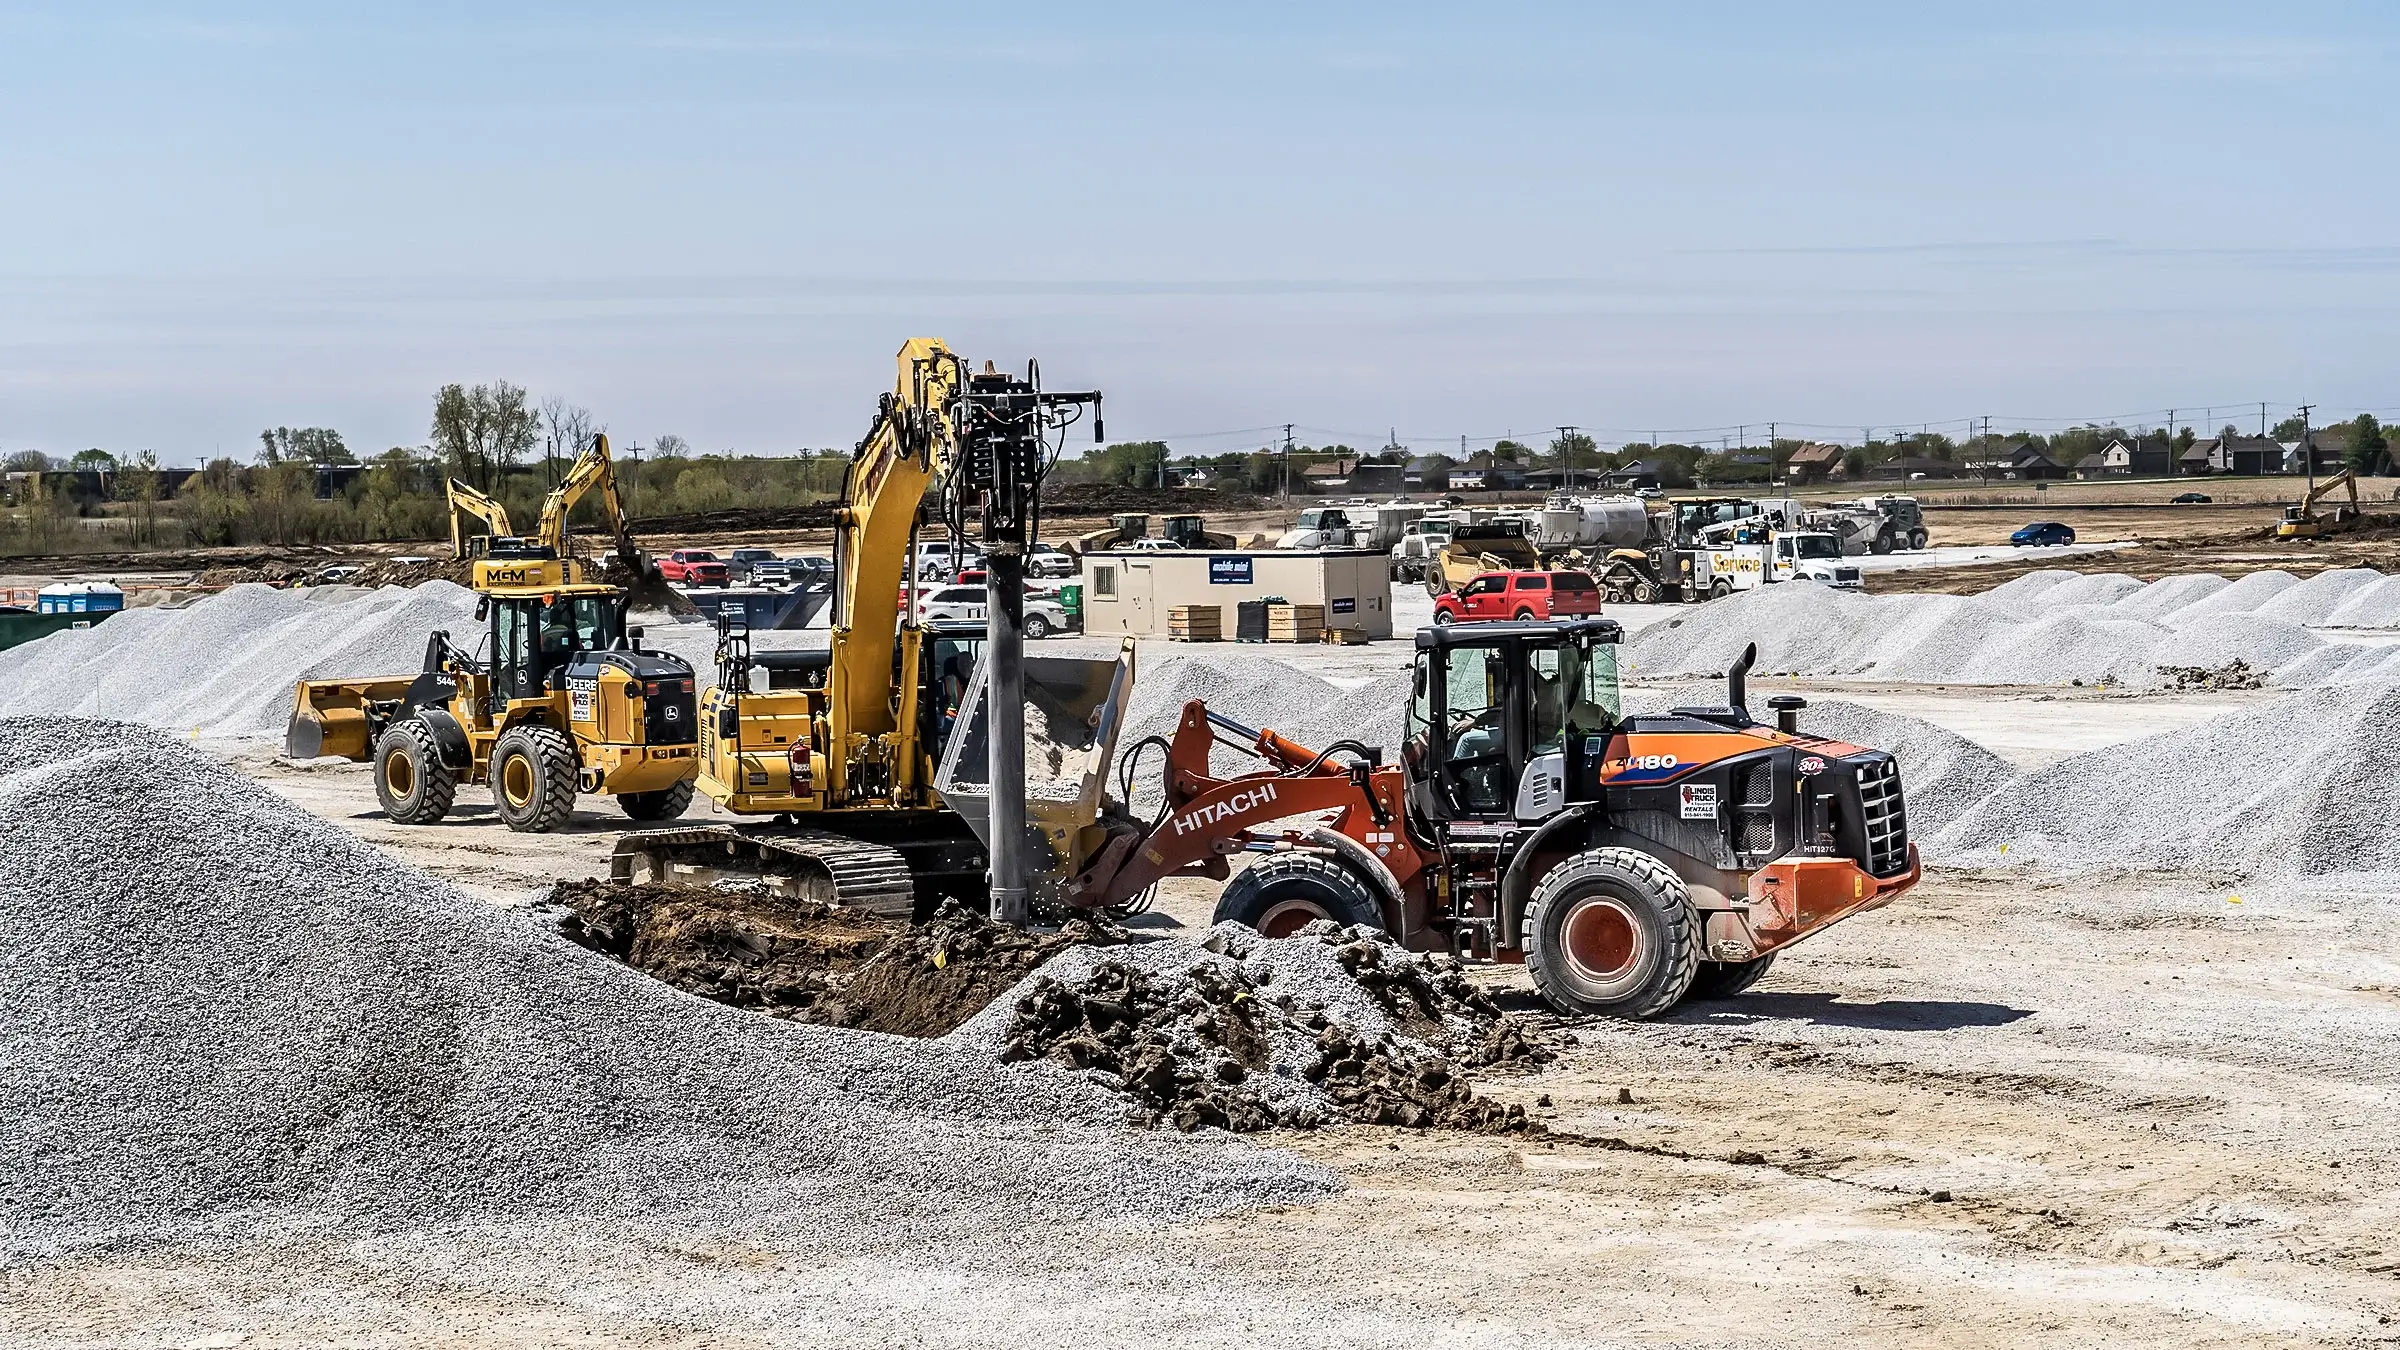 An excavator and backhoe assist in the installation of a ground improvement foundations job with many piles of aggregate nearby